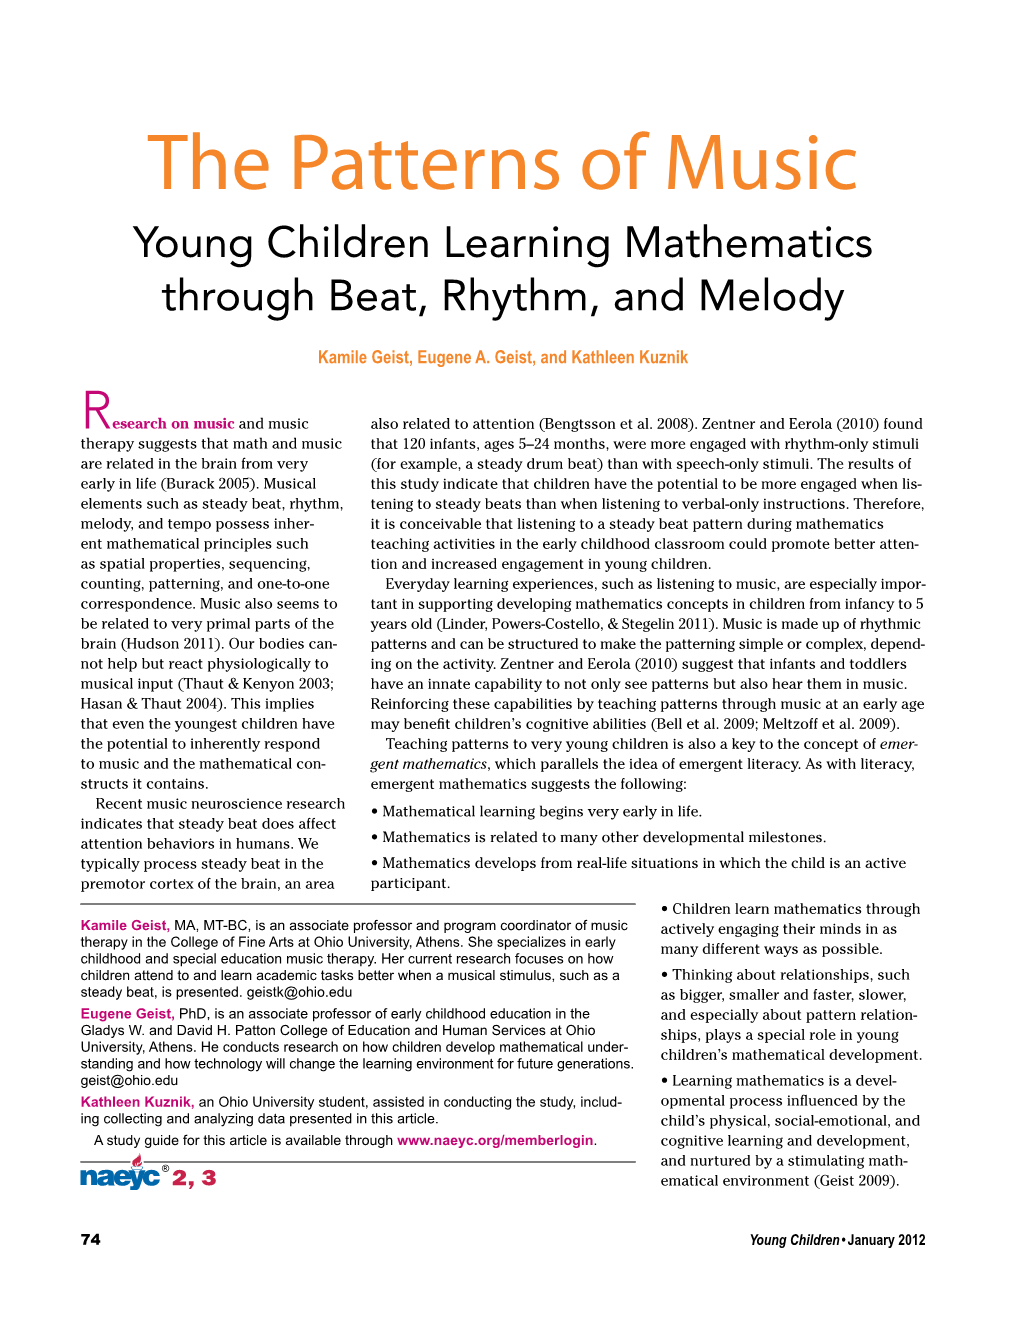 The Patterns of Music Young Children Learning Mathematics Through Beat, Rhythm, and Melody